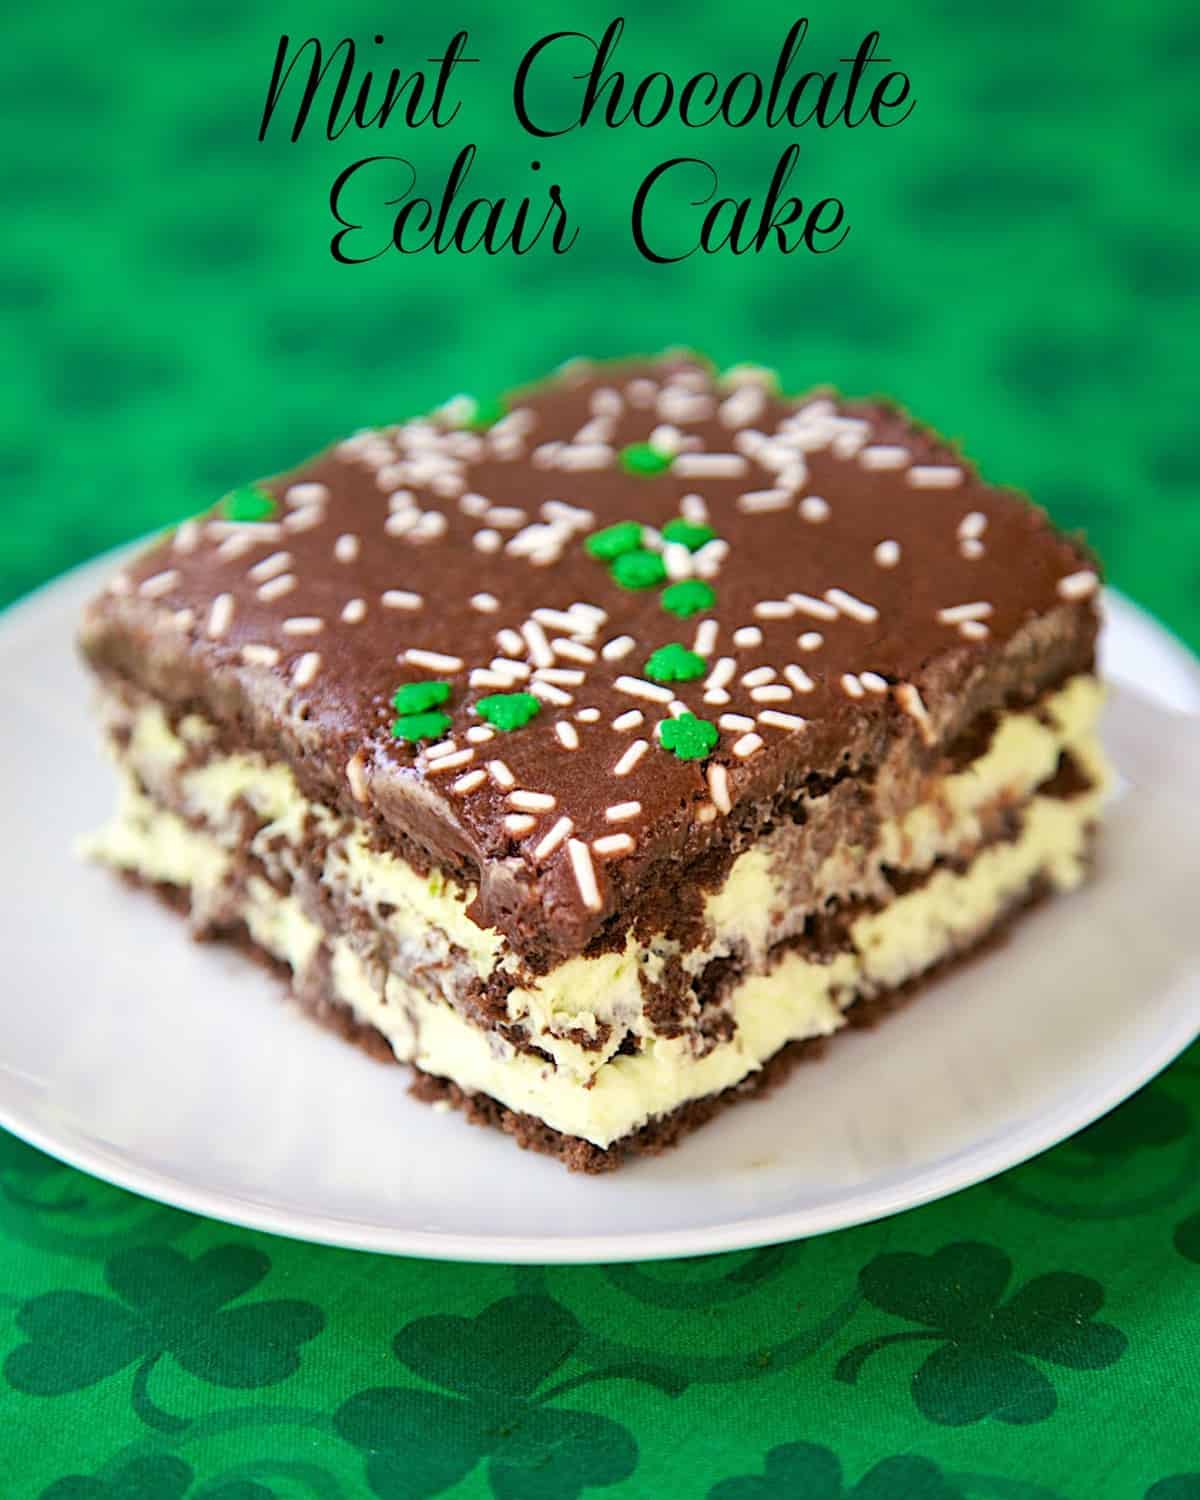 No-Bake Mint Chocolate Eclair Cake - chocolate graham crackers, pudding, cool whip, mint extract and chocolate frosting. Make ahead and refrigerate. Great dessert recipe for a crowd and St. Patrick's Day party!